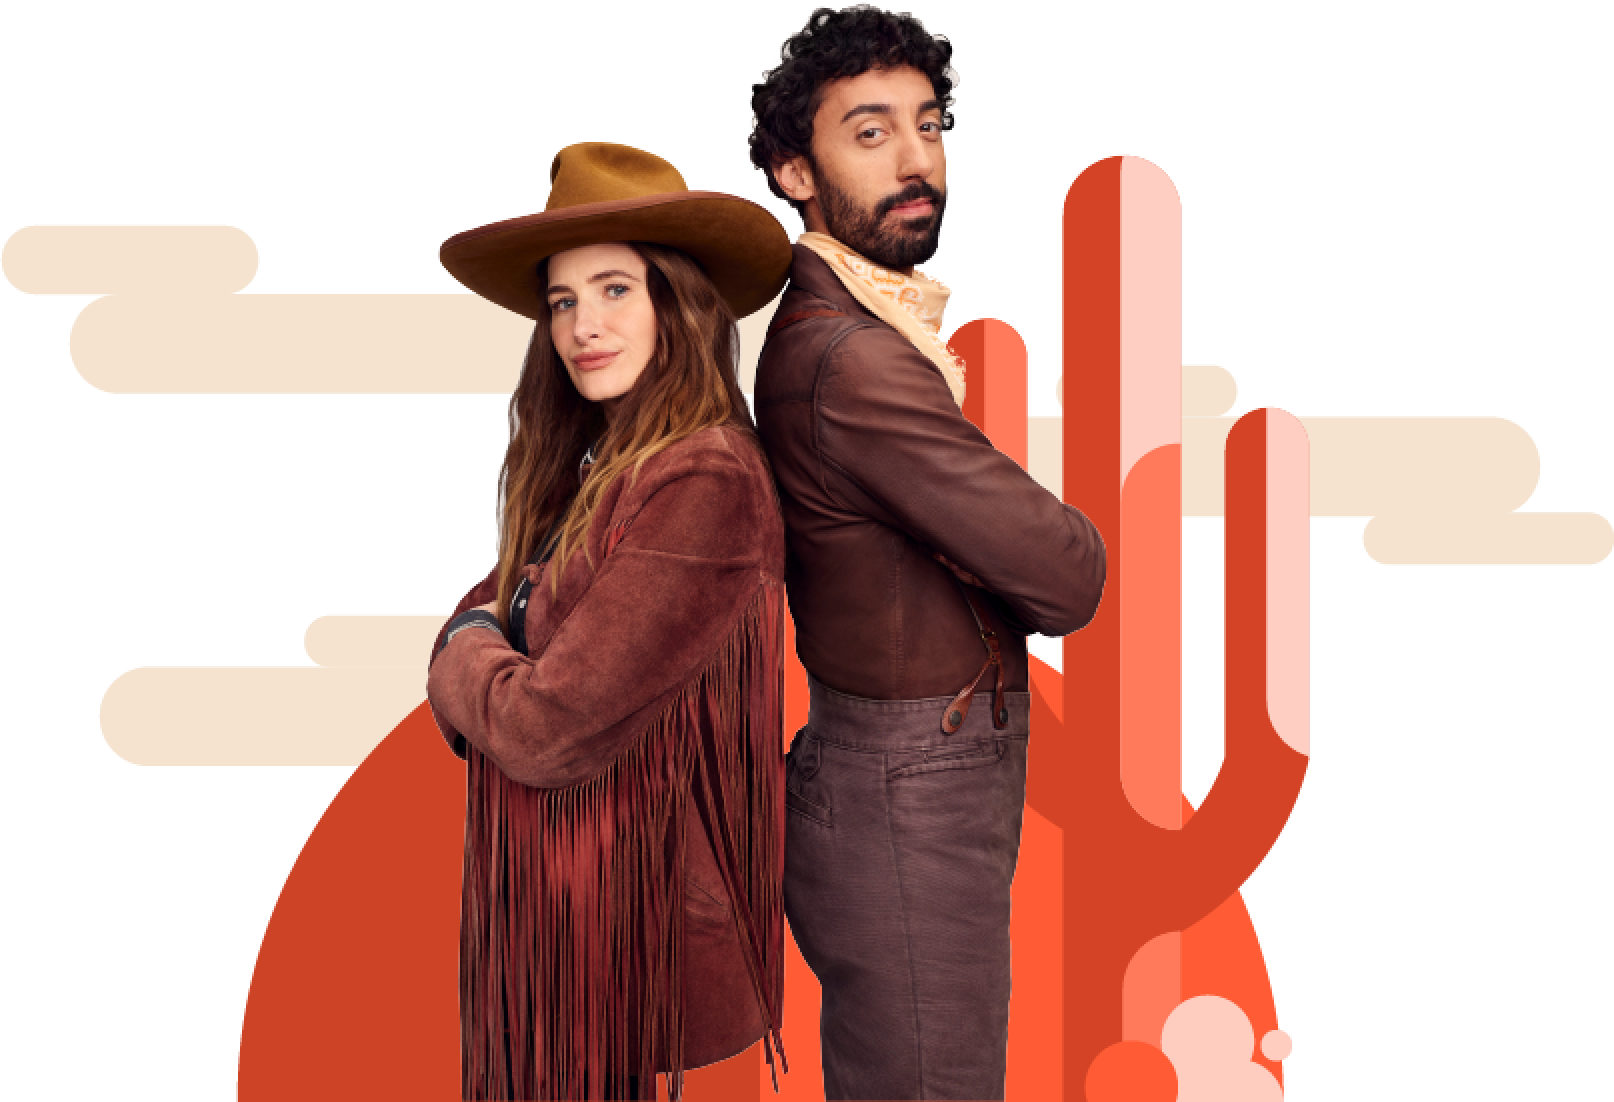 Kathryn and Marcel, dressed as western outlaws, standing back to back as a team, with a cactus and clouds behind them